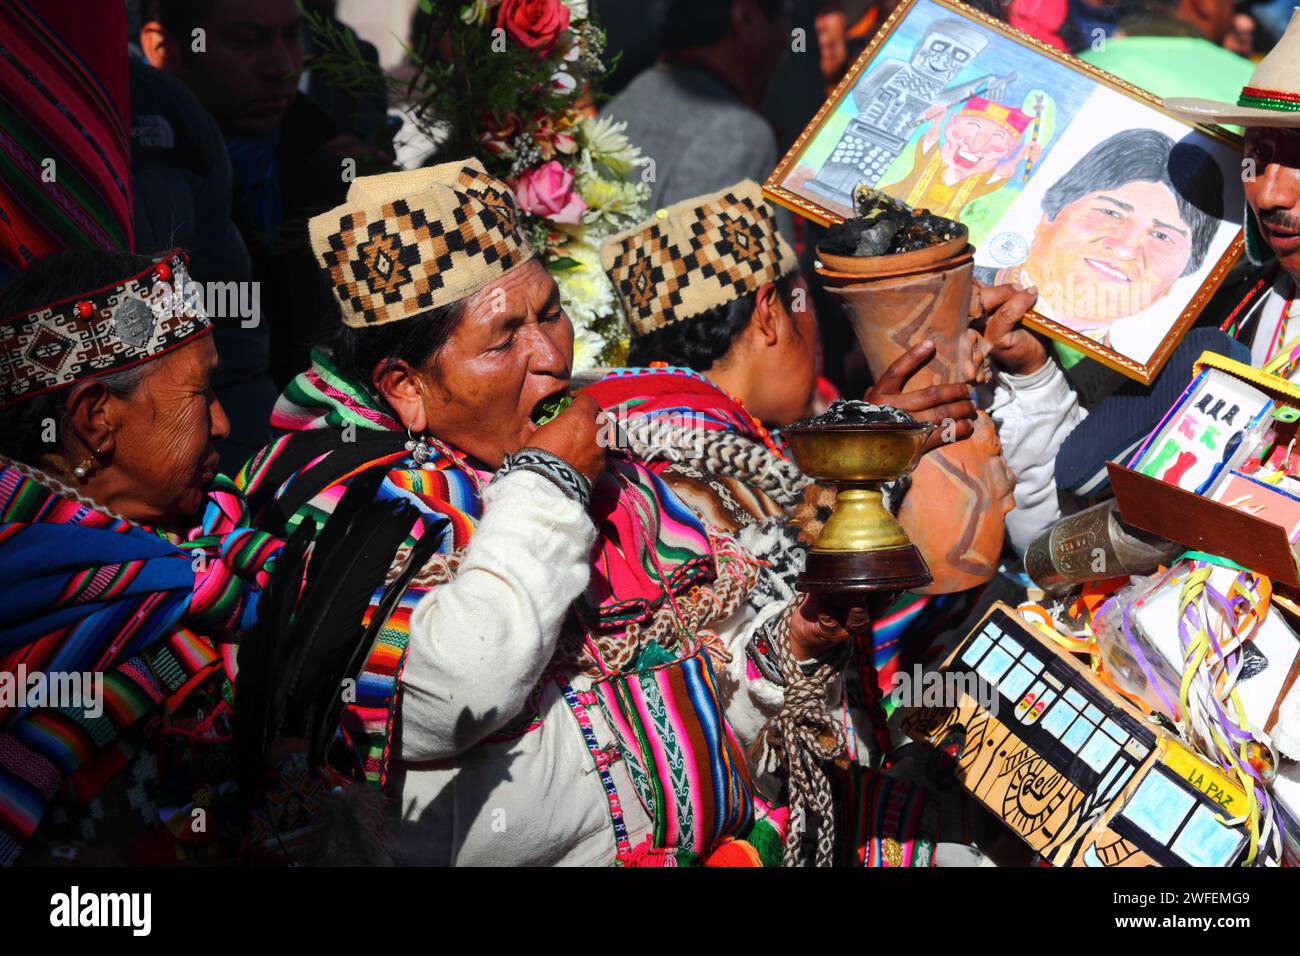 La Paz, BOLIVIA; 24th January 2015. A female shaman chewing coca leaves stands next to a man holding a picture of Bolivian president Evo Morales at an event to mark the start of the Alasitas festival in La Paz. The drawing was given to Evo Morales as a gift after this images was taken. Stock Photo